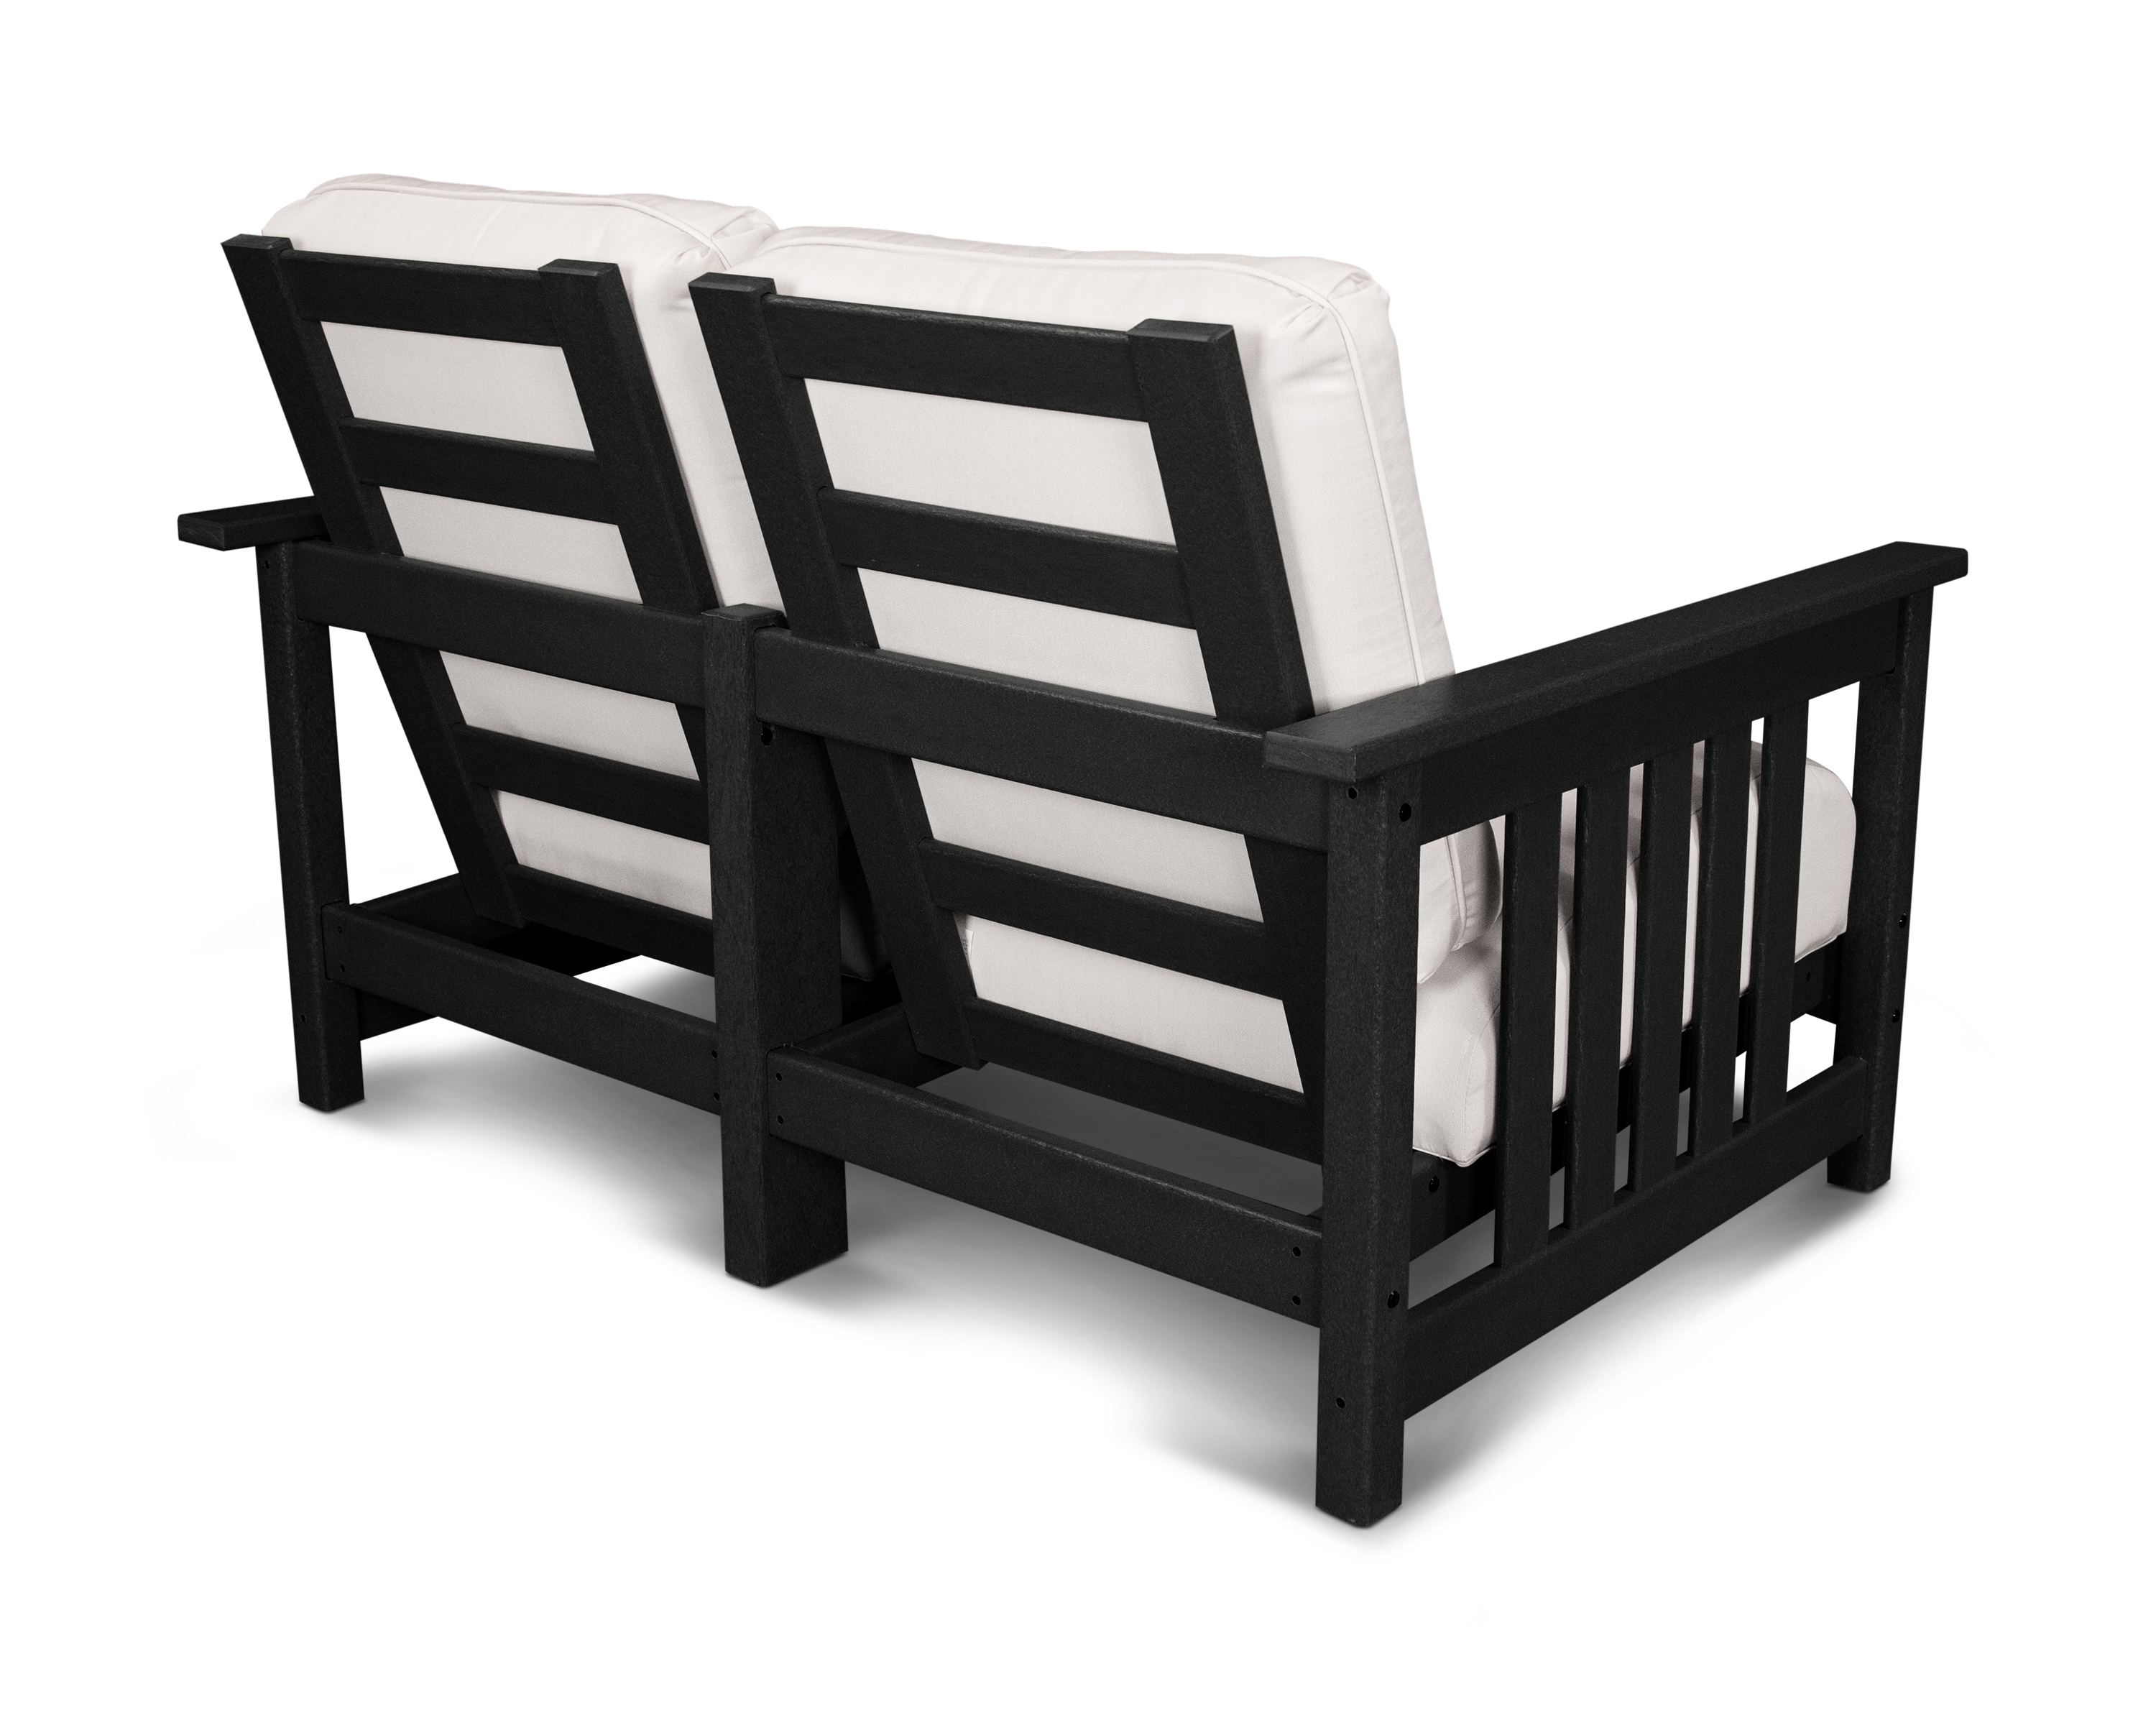 This Cozy Seat For Two Will Add Style And Charm To Your Outdoor Sitting Area. Constructed Of Fade-resistant, Black Solid Polywood